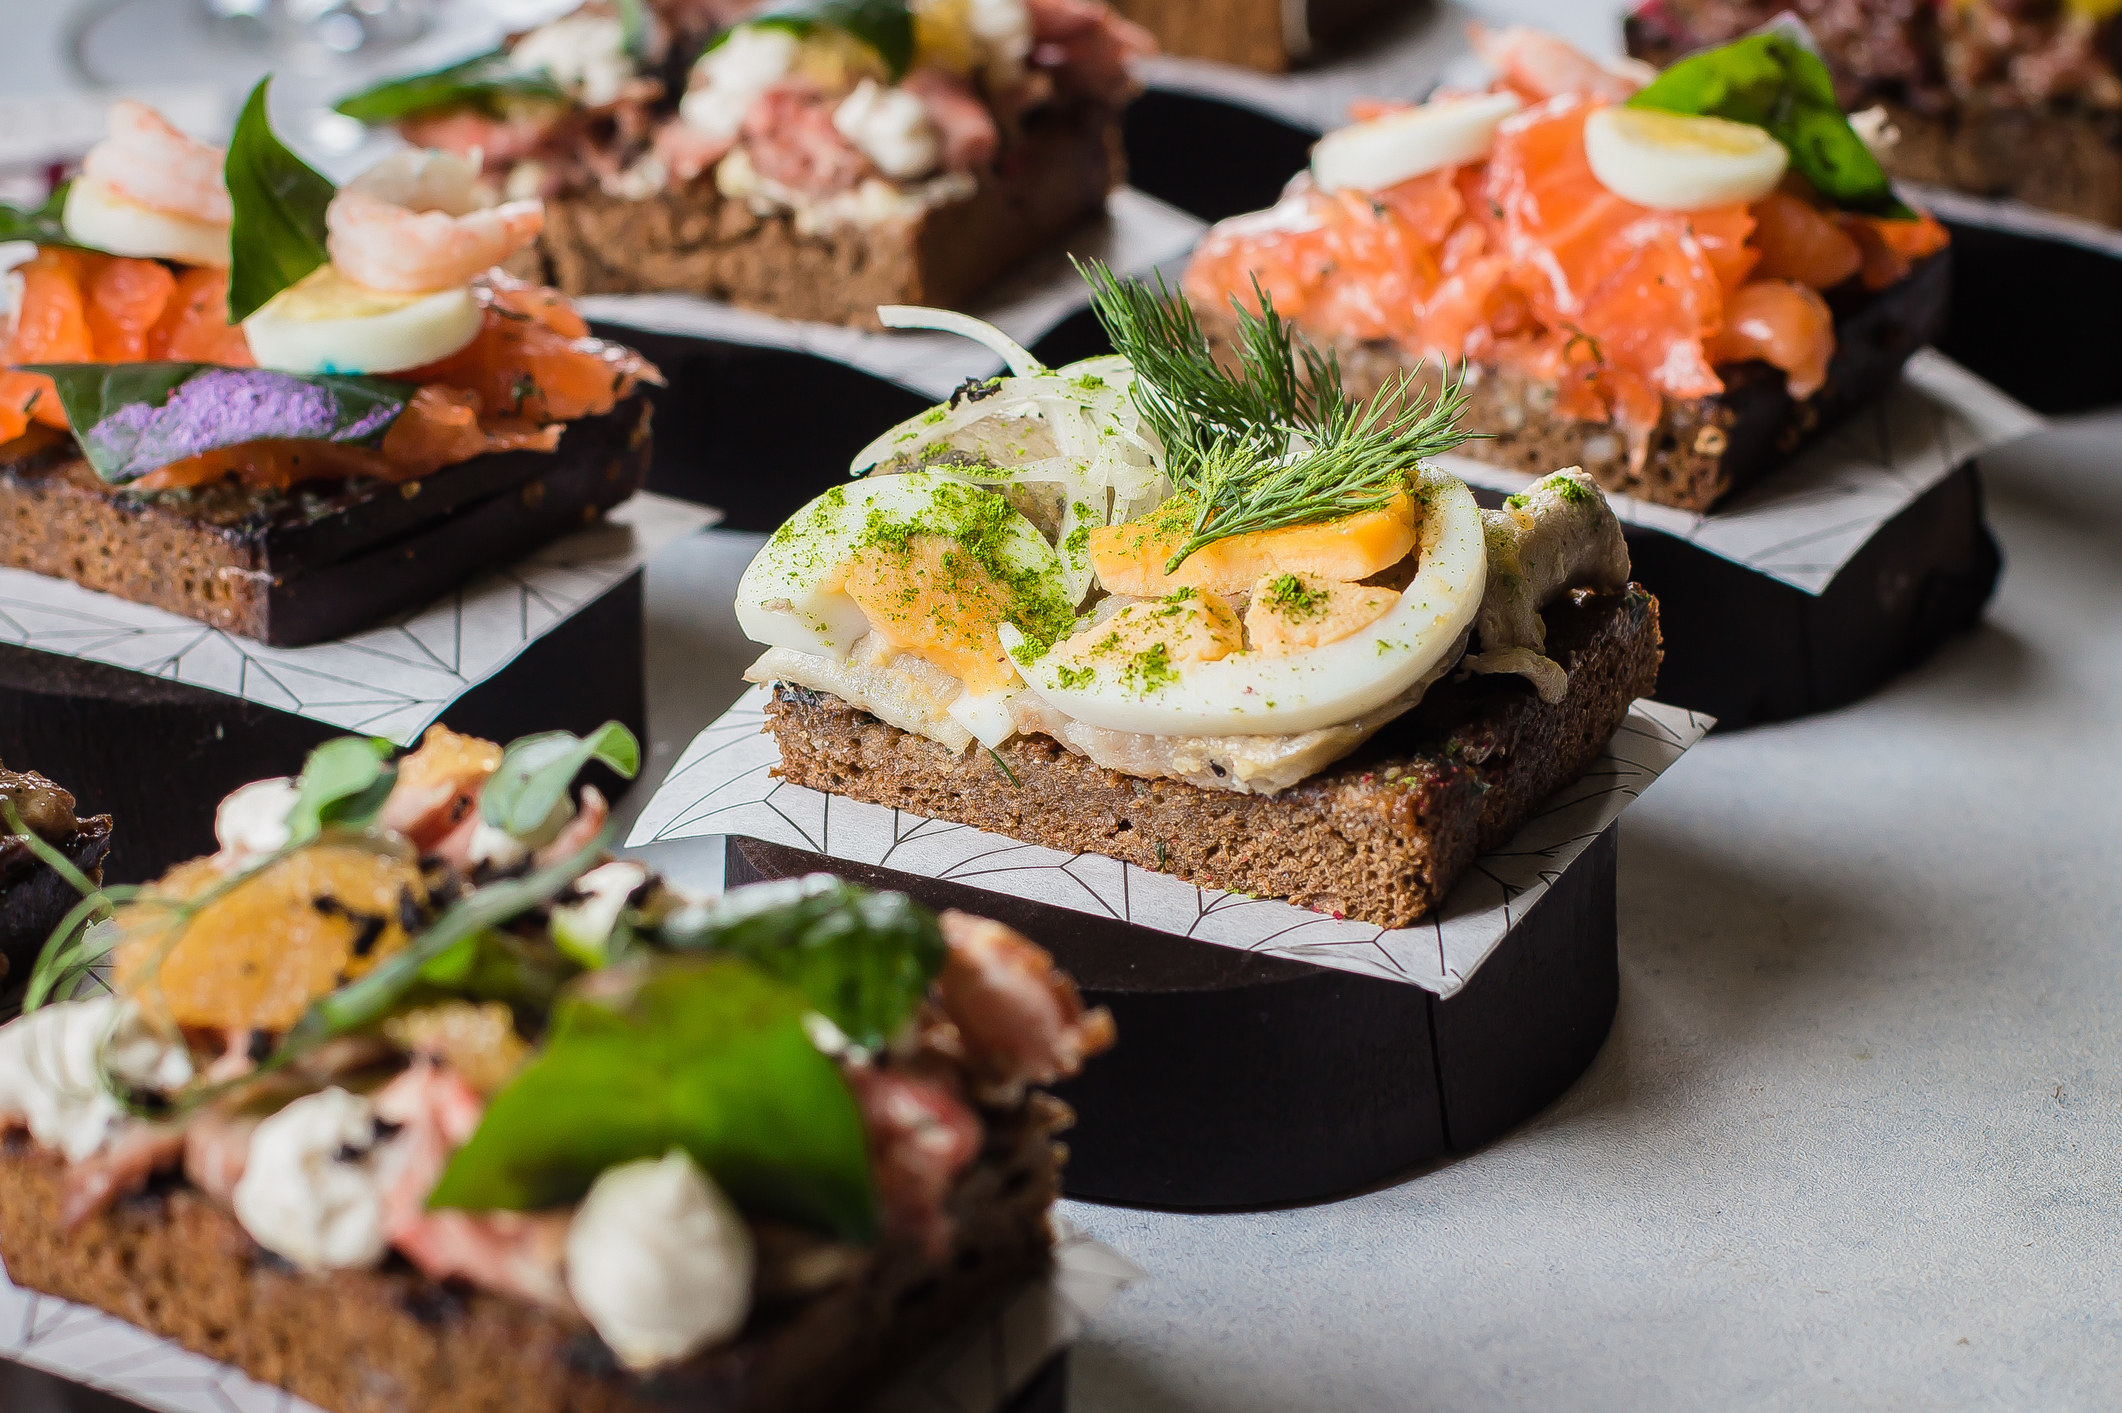 Open-faced sandwiches with different toppings